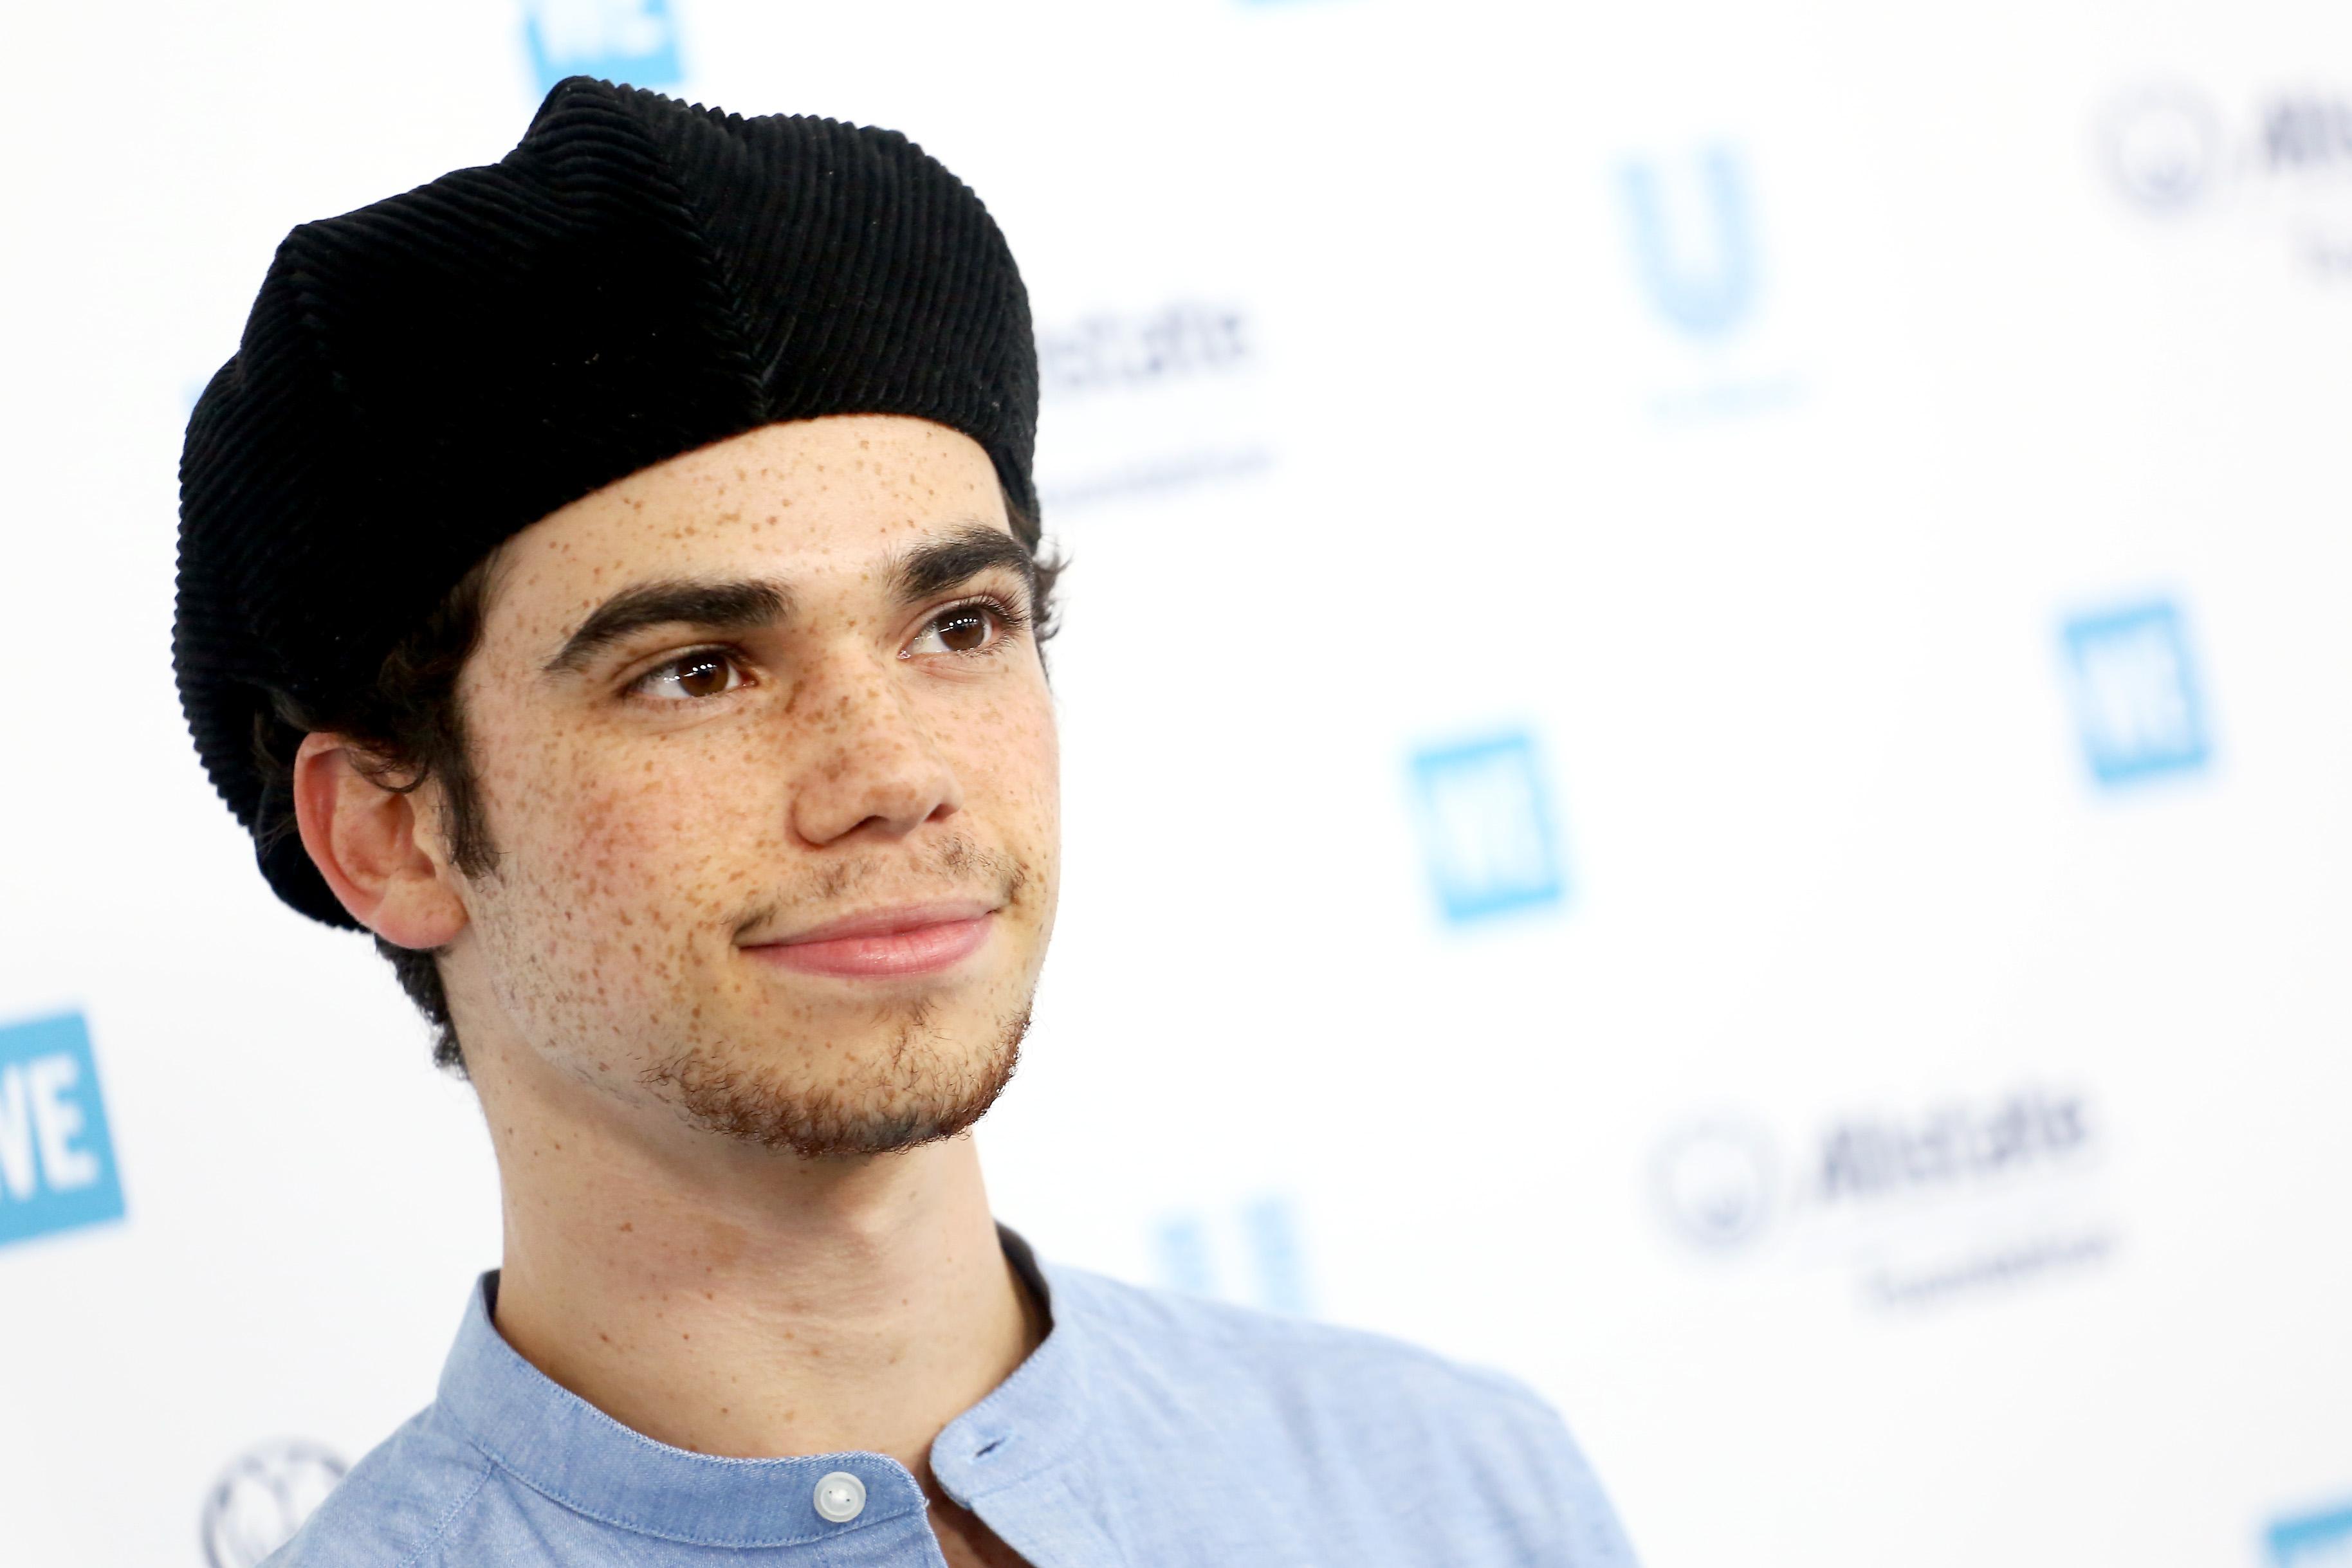 Cameron Boyce Official Cause of Death Revealed as Massive Epileptic Seizure